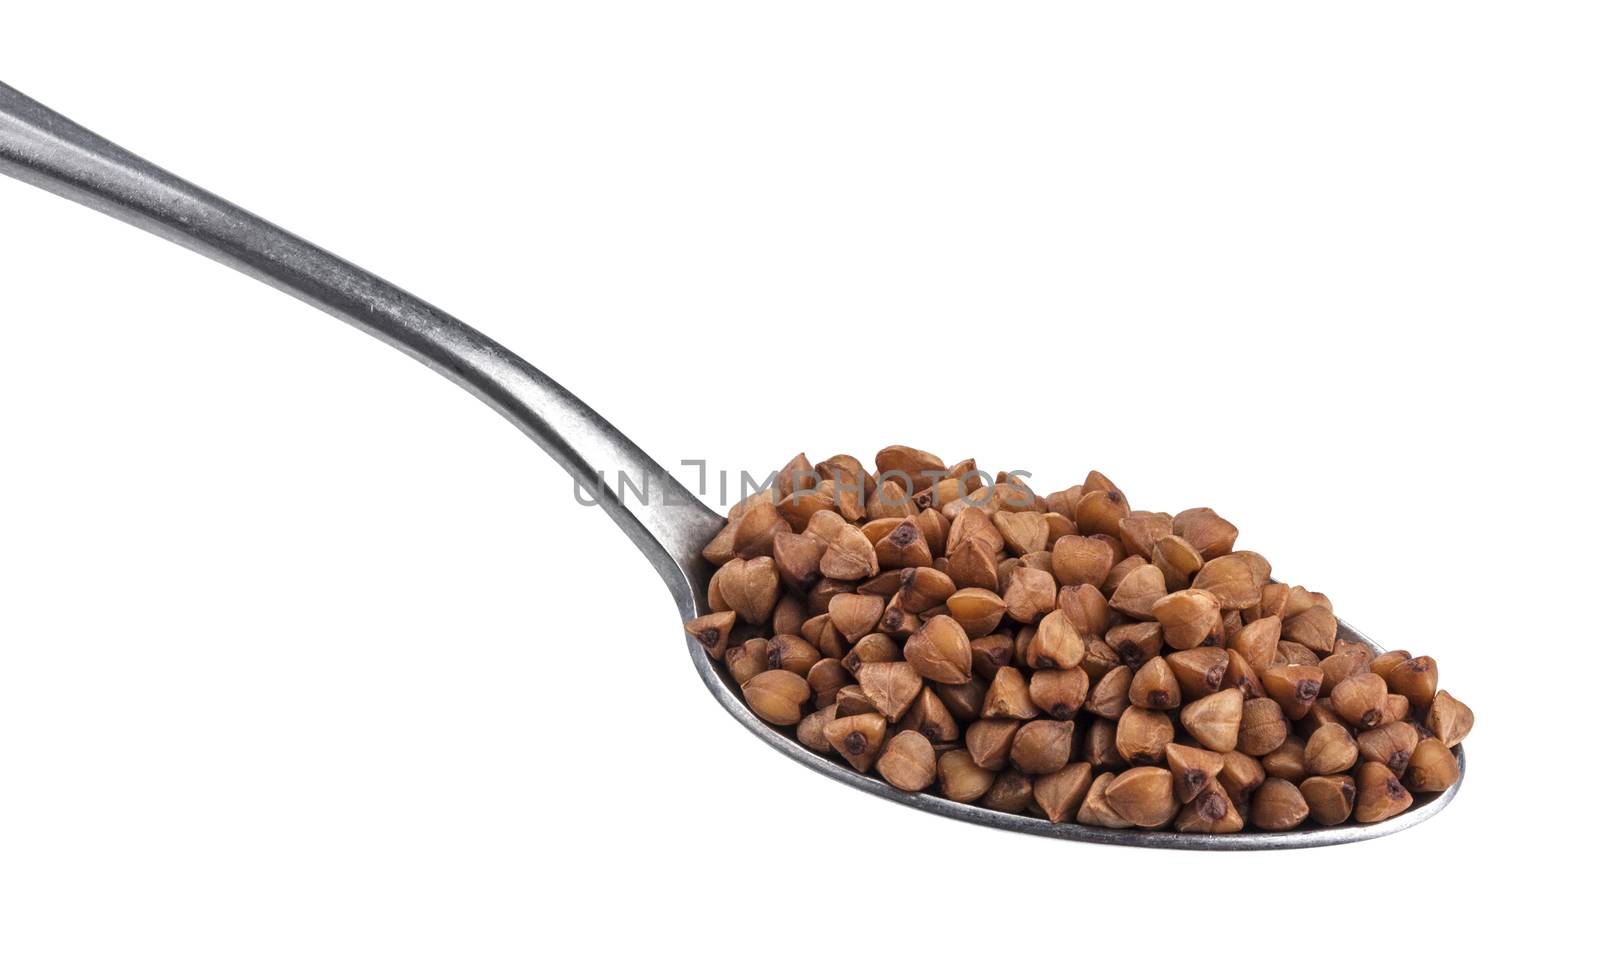 Buckwheat grains in spoon isolated on white background by xamtiw